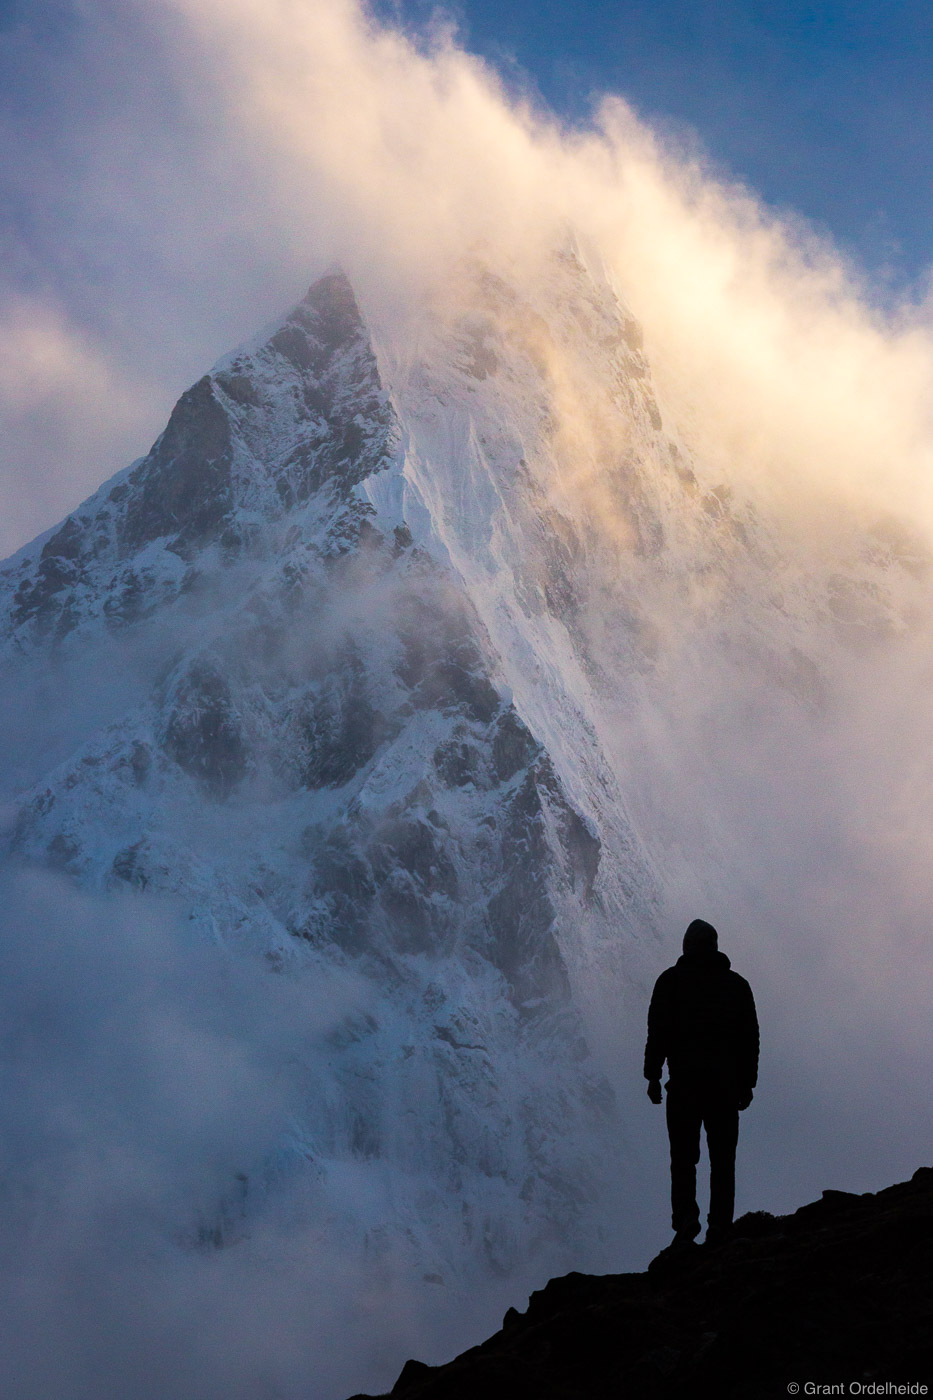 A lone figure stands in front of a clearing storm on Cholatse in the Everest Region of Nepal.